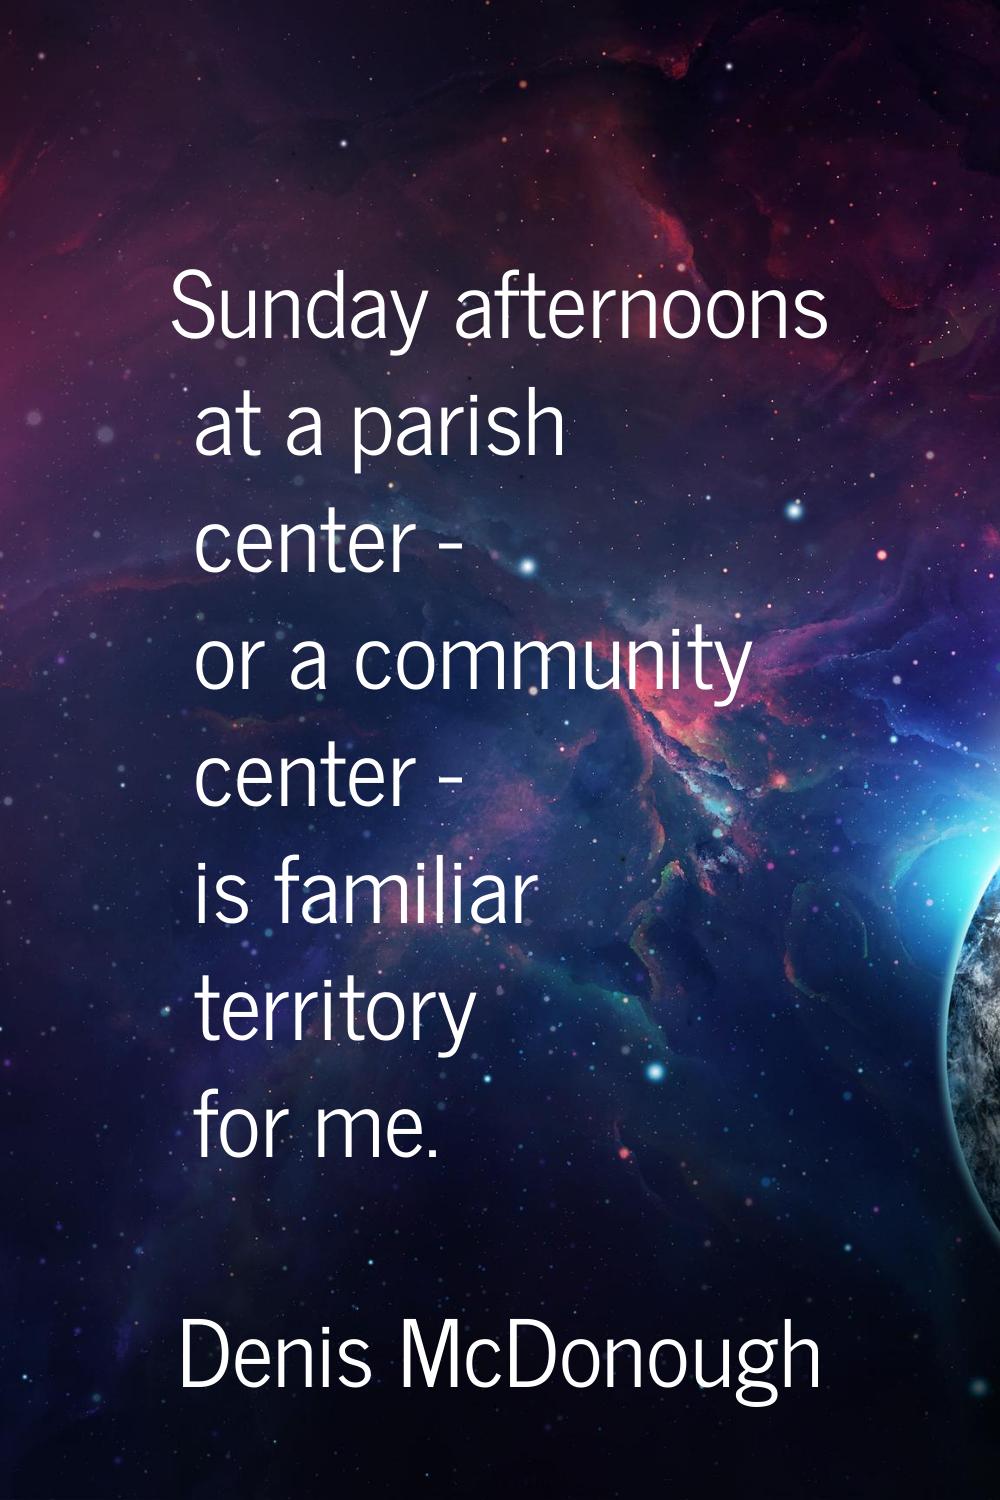 Sunday afternoons at a parish center - or a community center - is familiar territory for me.